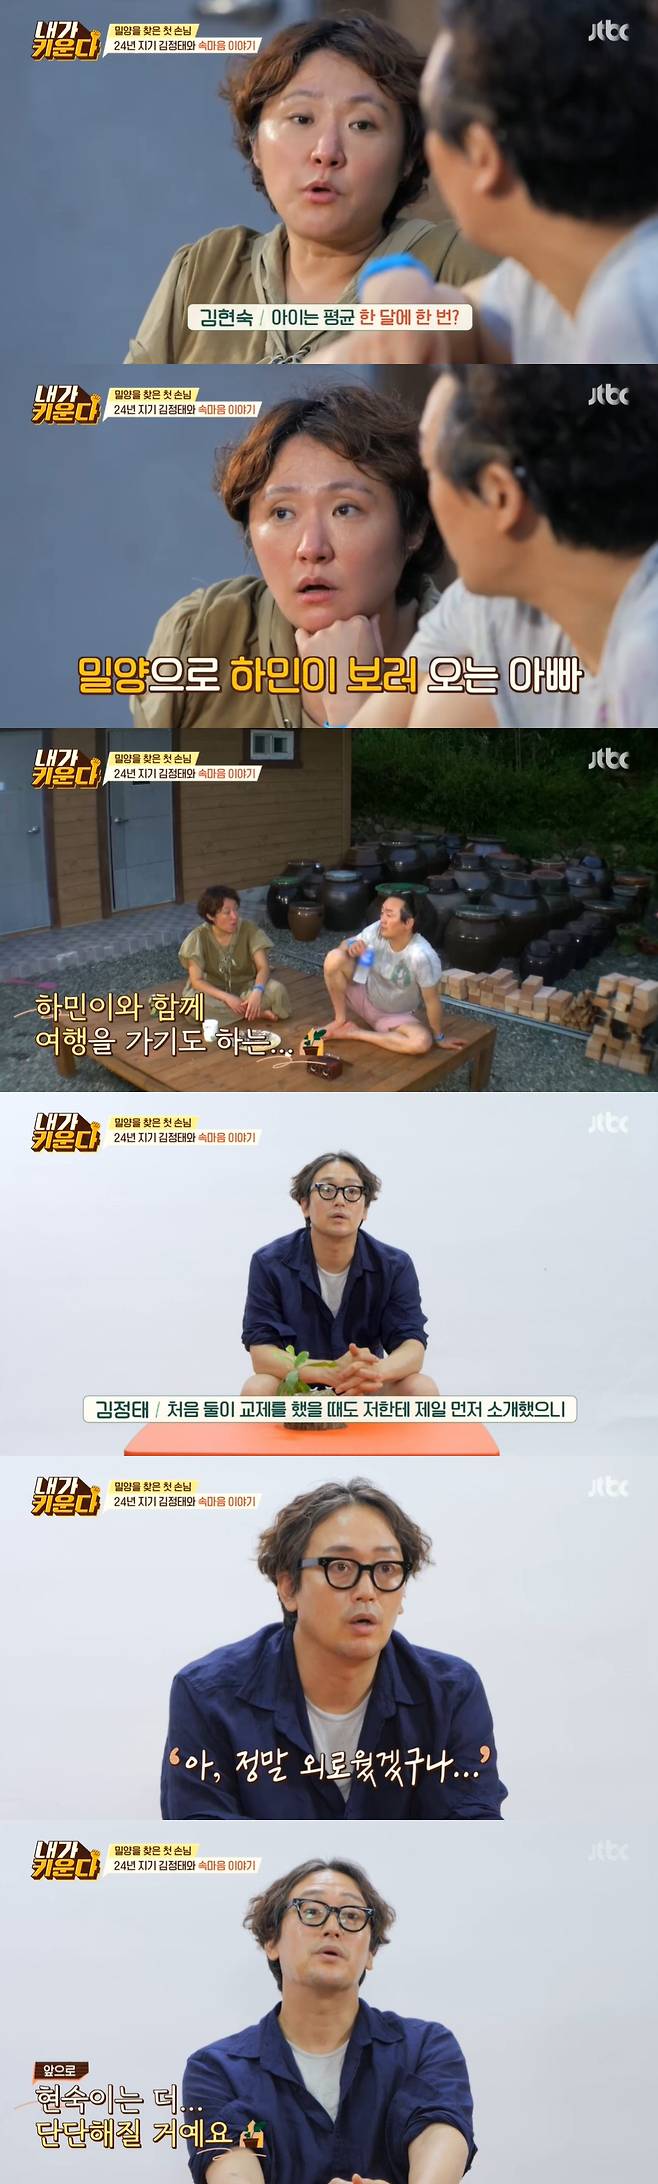 I raise it single mother actor Kim Hyun-Sook mentioned her ex-husband and Kim Jung-tae mentioned overcoming liver cancer.Kim Hyun-Sook and Kim Jung-tae appeared on the JTBC entertainment program Brave Solo Parenting - I Raise (hereinafter referred to as I Raise), which aired on the 20th.On this day, Kim Hyun-Sook hat had a good time at Kim Jung-tae, his two sons and Secret Sunshine house.First, they gathered together to make a gong, to eat the pot lid pork belly.Kim Jung-tae baked pork belly on the lid of the pot with a visual that was delicious, and Hamin laughed at it, saying, I bake meat well.Everyone went to the food shop, boiling the meat and ramen, and then playing table tennis games by dividing the team.Late afternoon, Kim Hyun-Sook and Kim Jung-tae settled on a drink with the Crown Prince and Kim Bugak; Kim Hyun-Sook said: It was the day the results came out today.I expected it to be positive, but the lump was cancer. I removed it. I told him to take anticancer drugs in advance. Kim Jung-tae, who has overcome liver cancer, said, I know its really difficult to know because Ive been operating.I just tasted it, but I was lying down for 24 hours. I went to the hospital because I was so sick and it was revealed that it was cancer.I came here (to fix the bottle) so that you do not come to the memorial park. Kim Jung-tae asked Kim Hyun-Sook, Do you meet a child Father once? and Kim Hyun-Sook said, The child sees once a month on average.Hamin is now in Jeju Island, and he comes to Secret Sunshine to meet with his child.I got along very well with Father, he replied.Kim Jung-tae told the production team, I know what Hyun Sook will say. I was the first to introduce her to my ex-husband.I thought I would be lonely when I came home today, and I think there will be a place where my parents can be comforted and the child will fill my heart, but there will be an empty place that is not filled.It will be harder, he said.